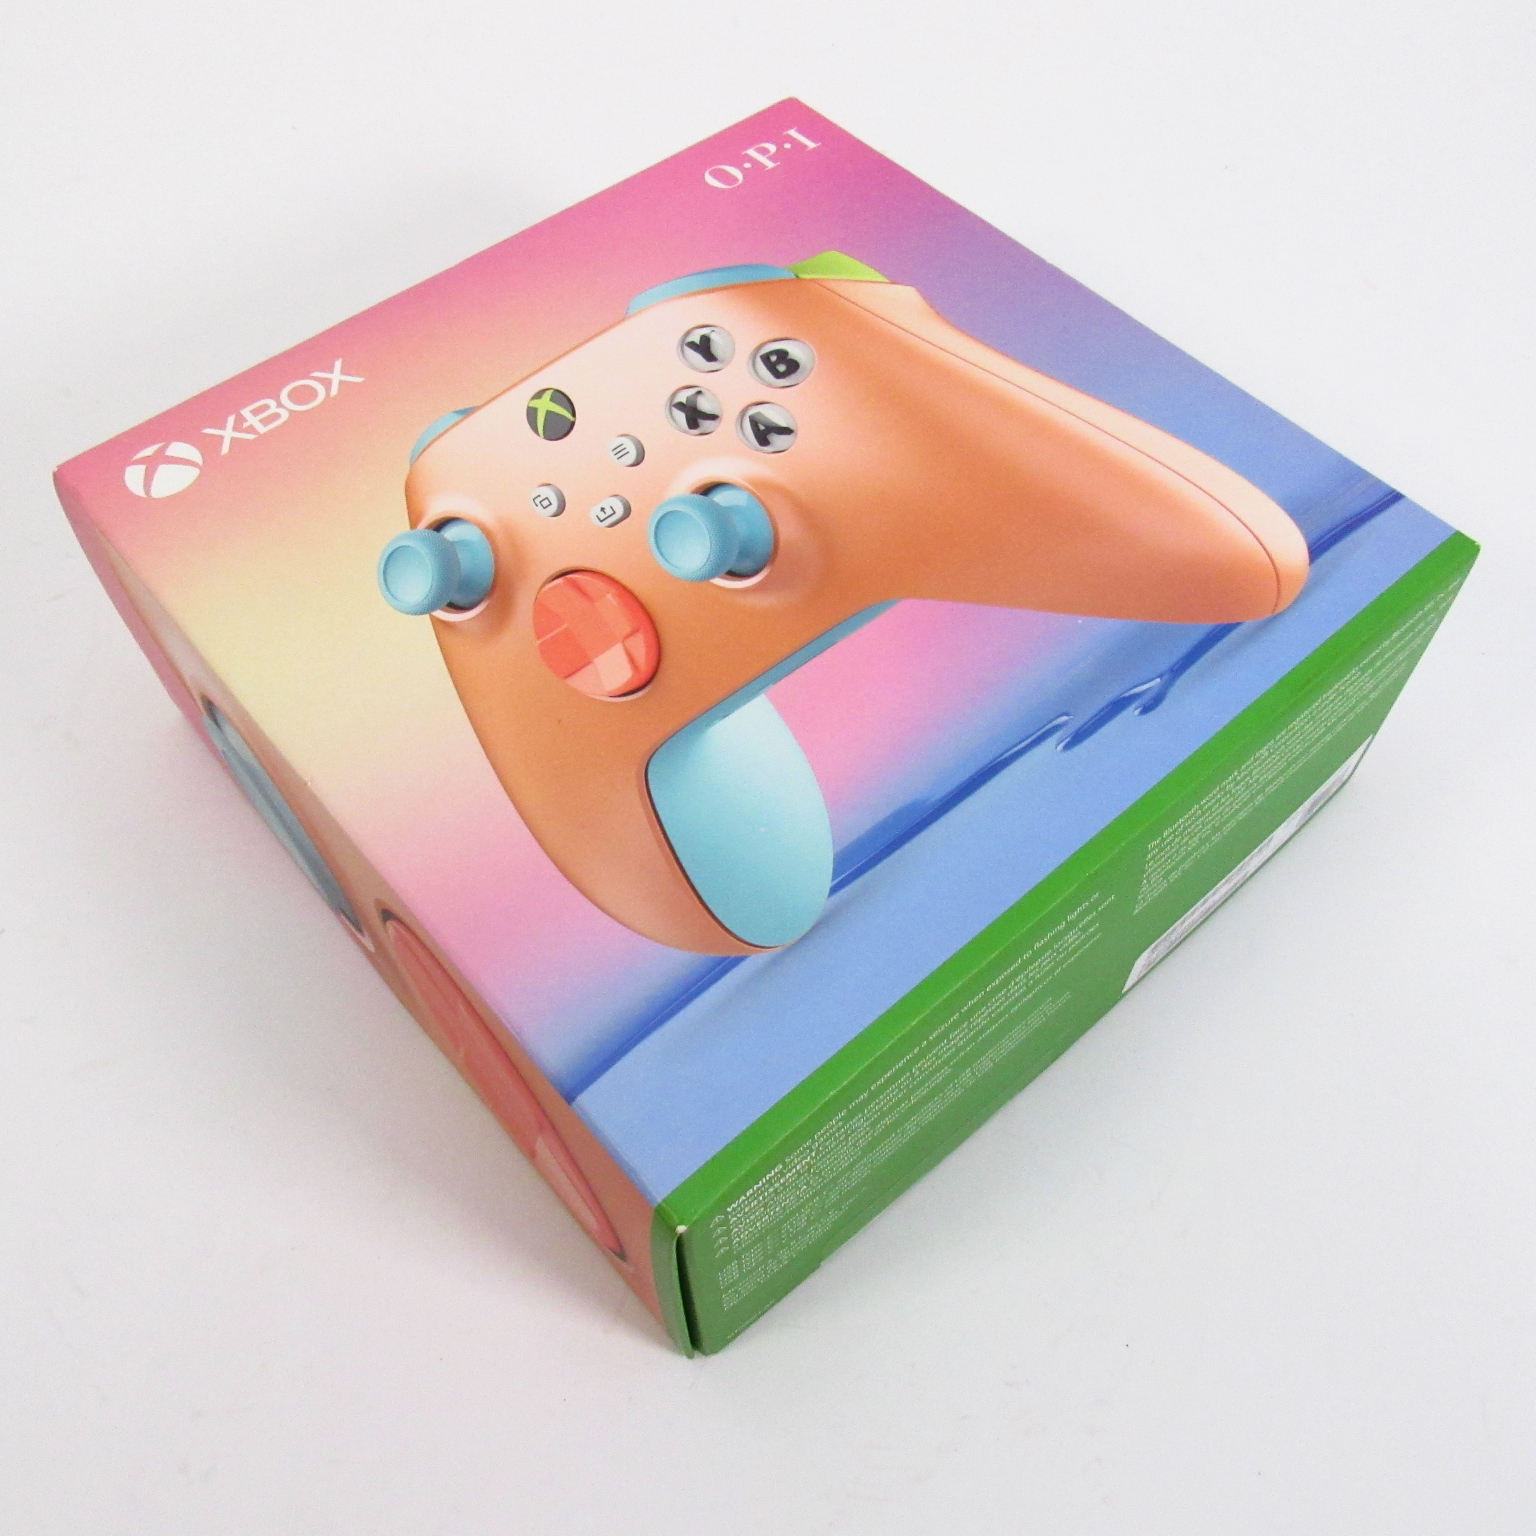 Xbox Wireless Controller Edition O.P.I. Special - 1914 Microsoft Sunkissed Vibes